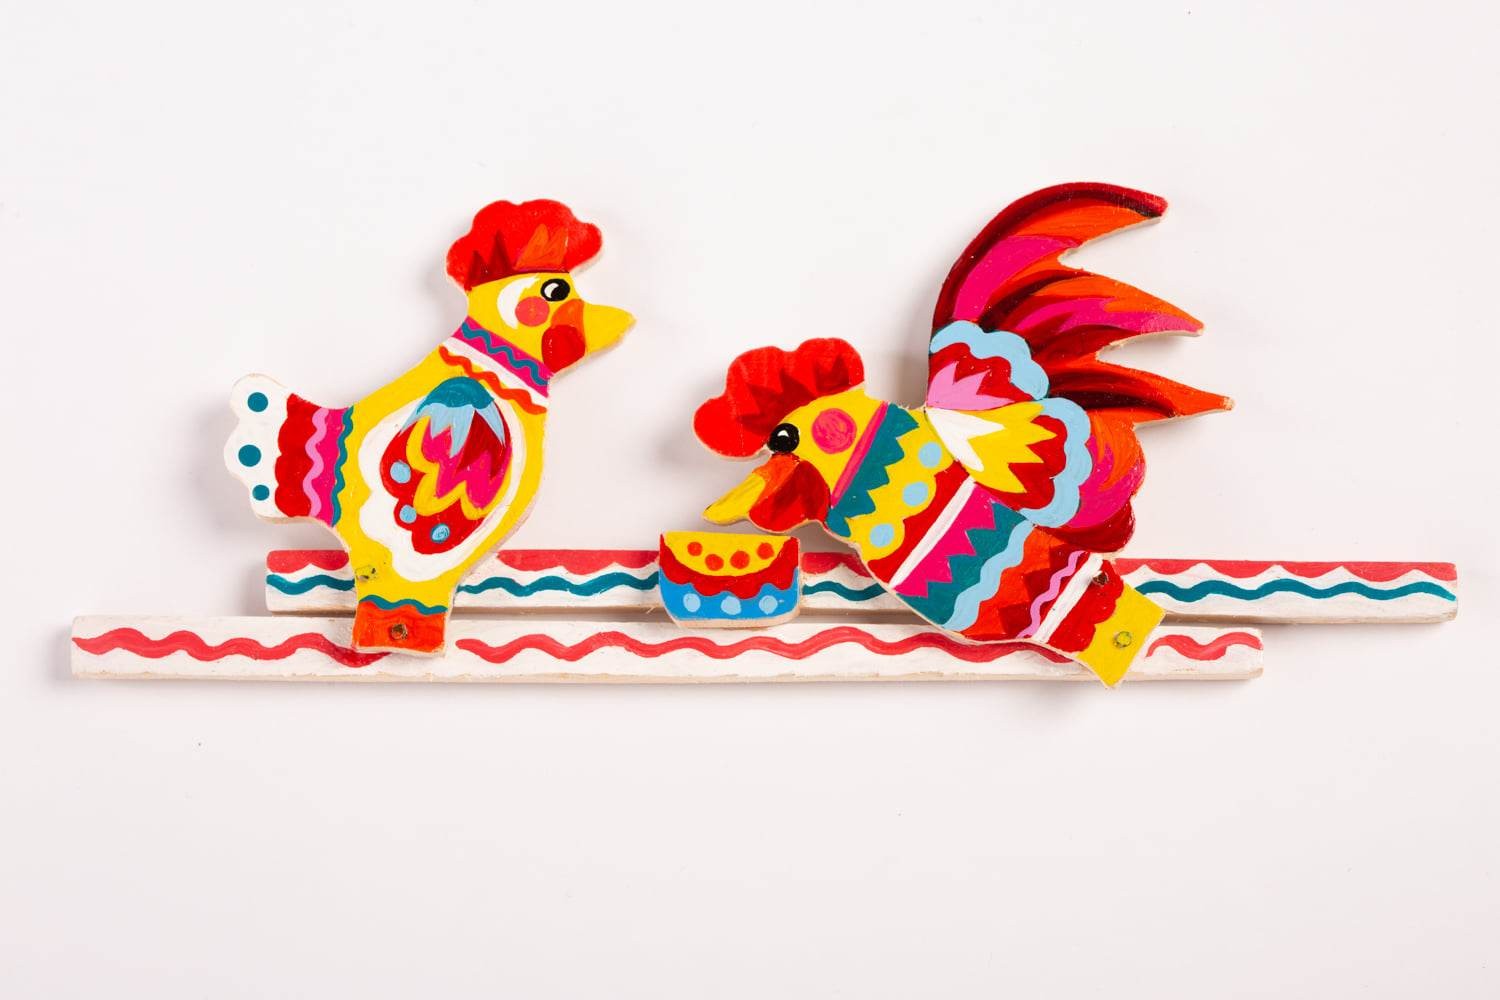 Roosters Toy, Toddler Game, Movable Toy, Samchykivka Hand Painted